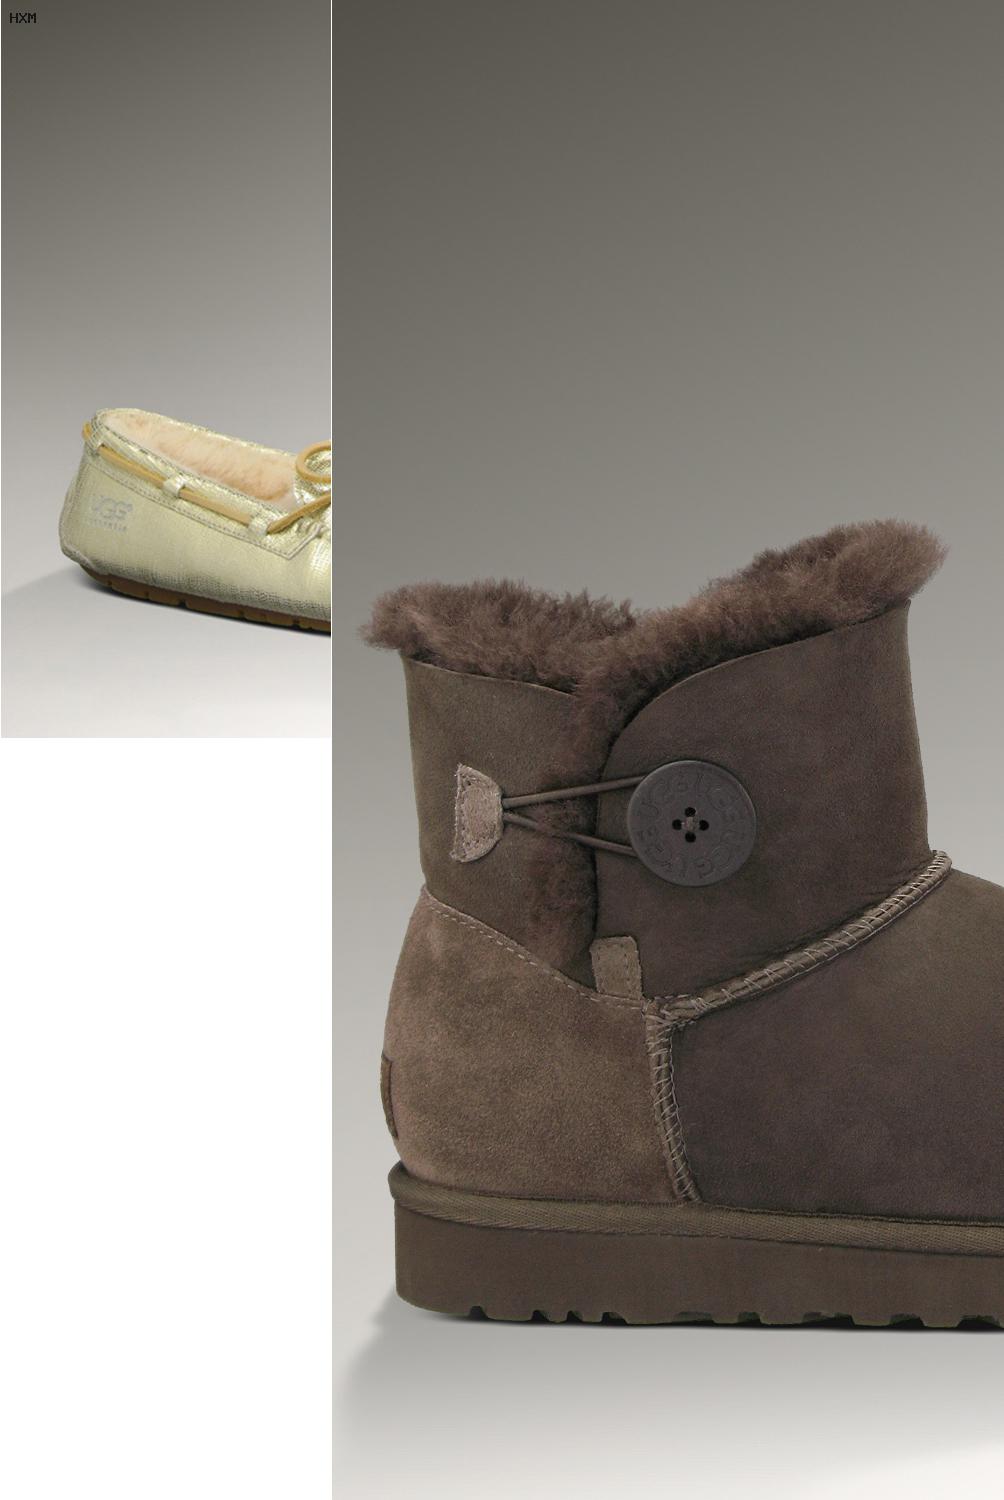 copy ugg boots wholesale